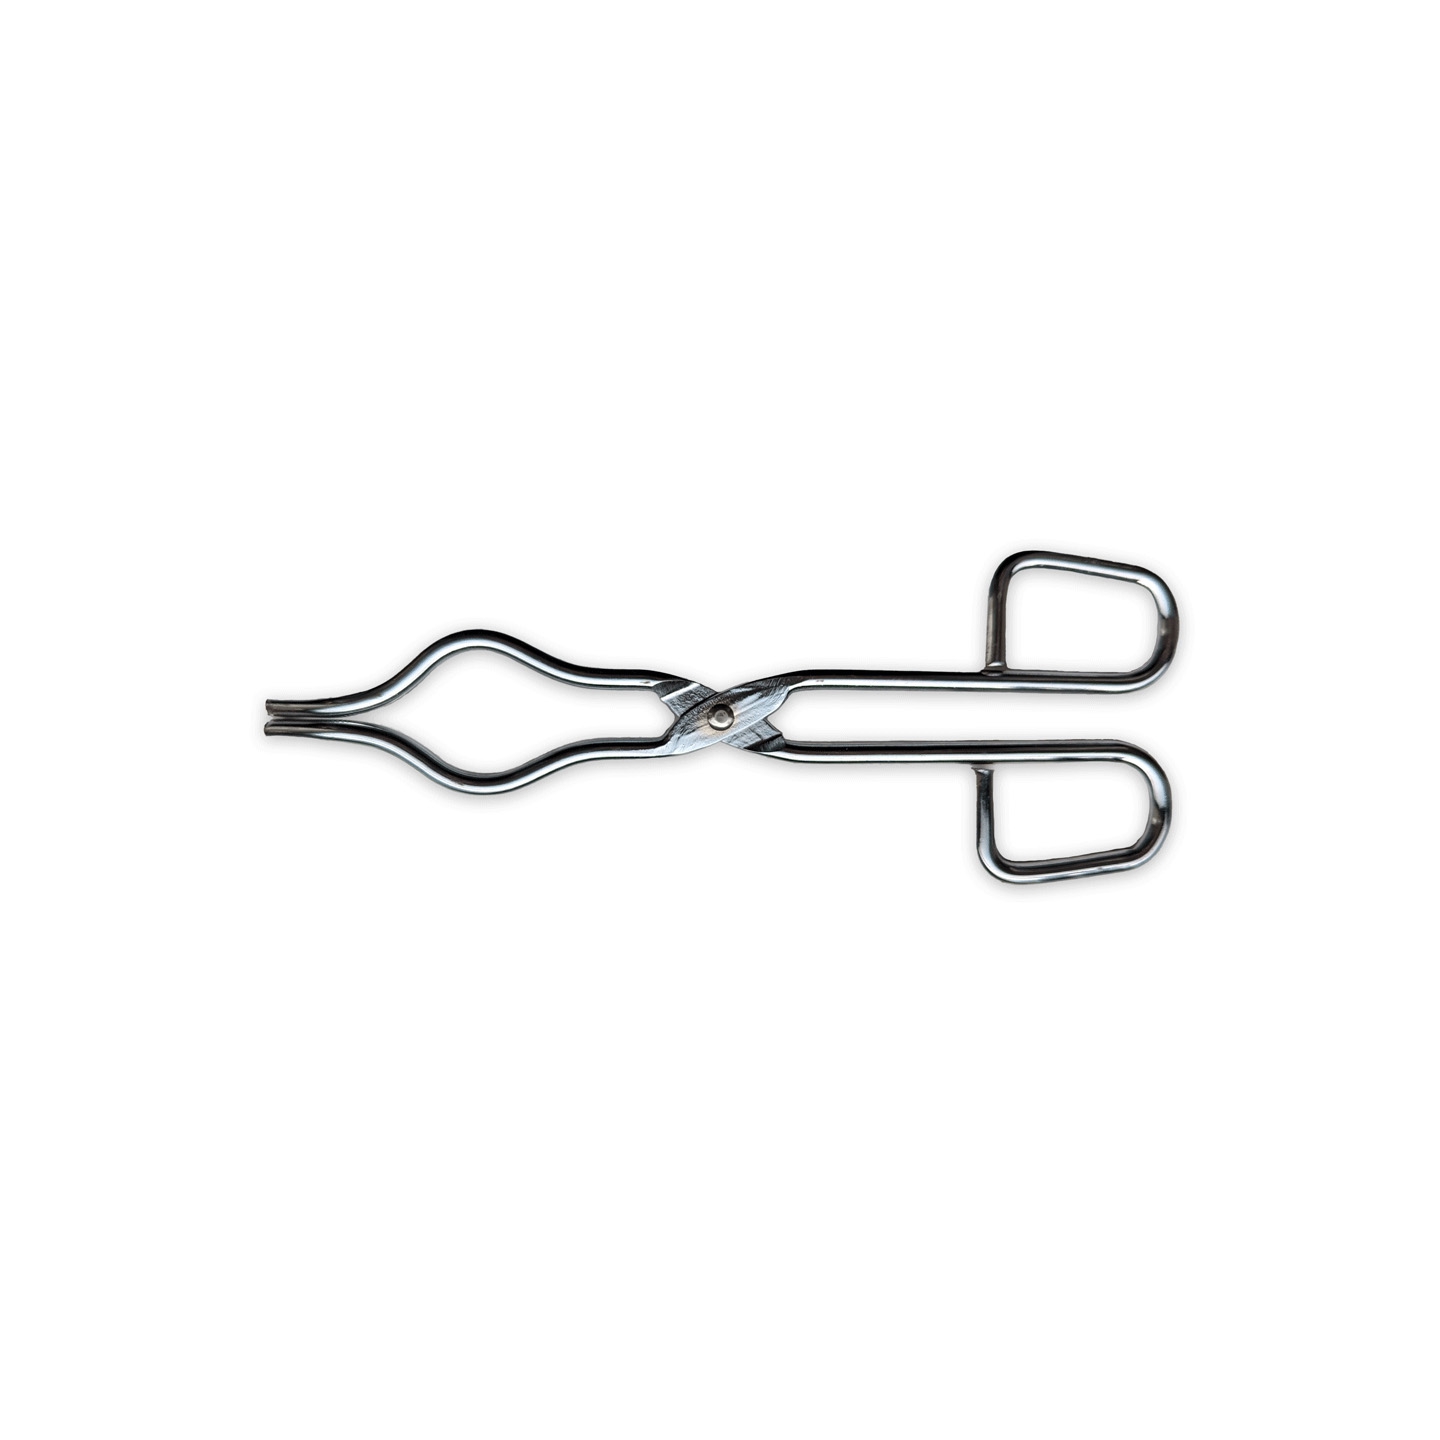 Crucible Tong, Stainless Steel, Length 200mm, Bow Curved Tips, Flat Hinge